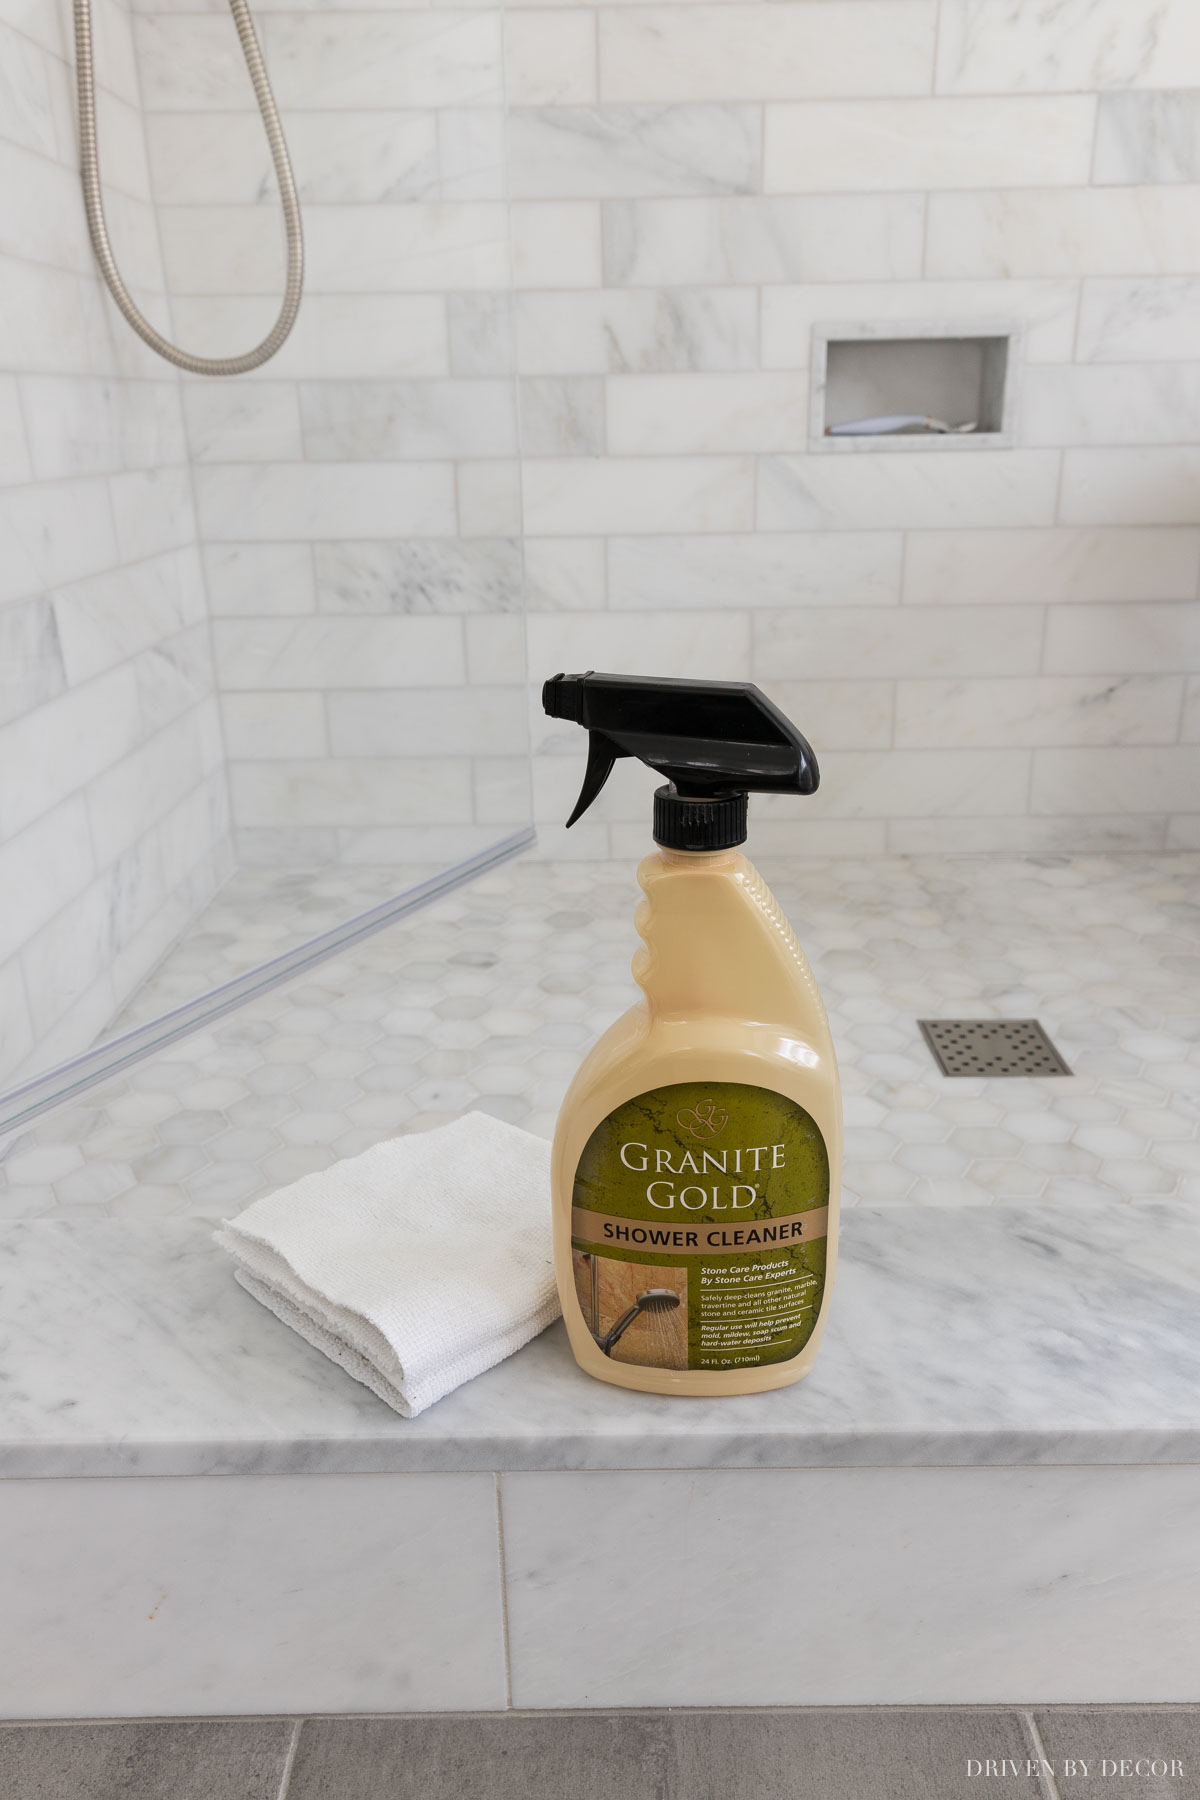 3 Effective Homemade Grout Cleaners to Try